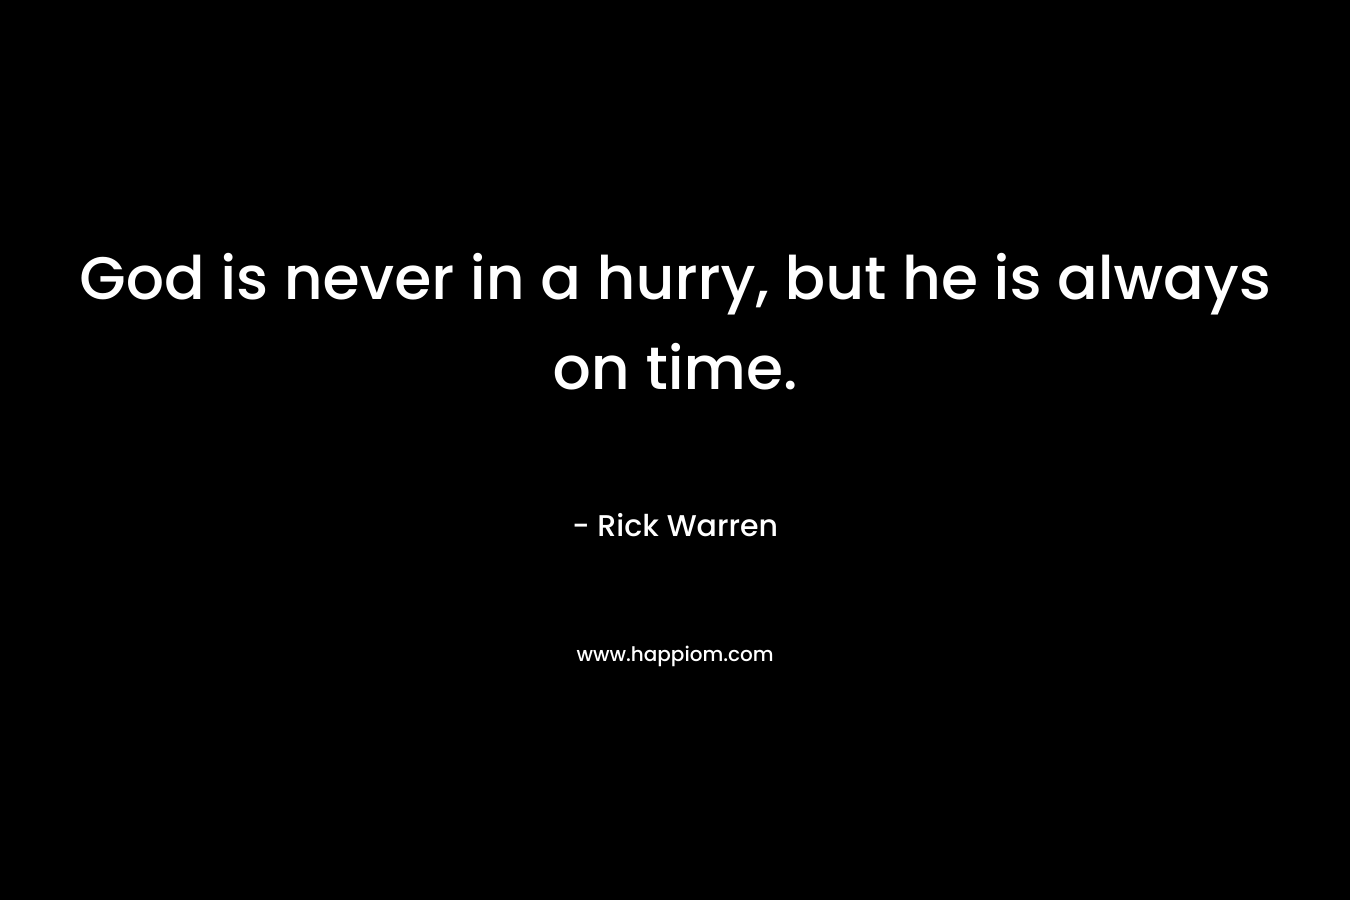 God is never in a hurry, but he is always on time. – Rick Warren